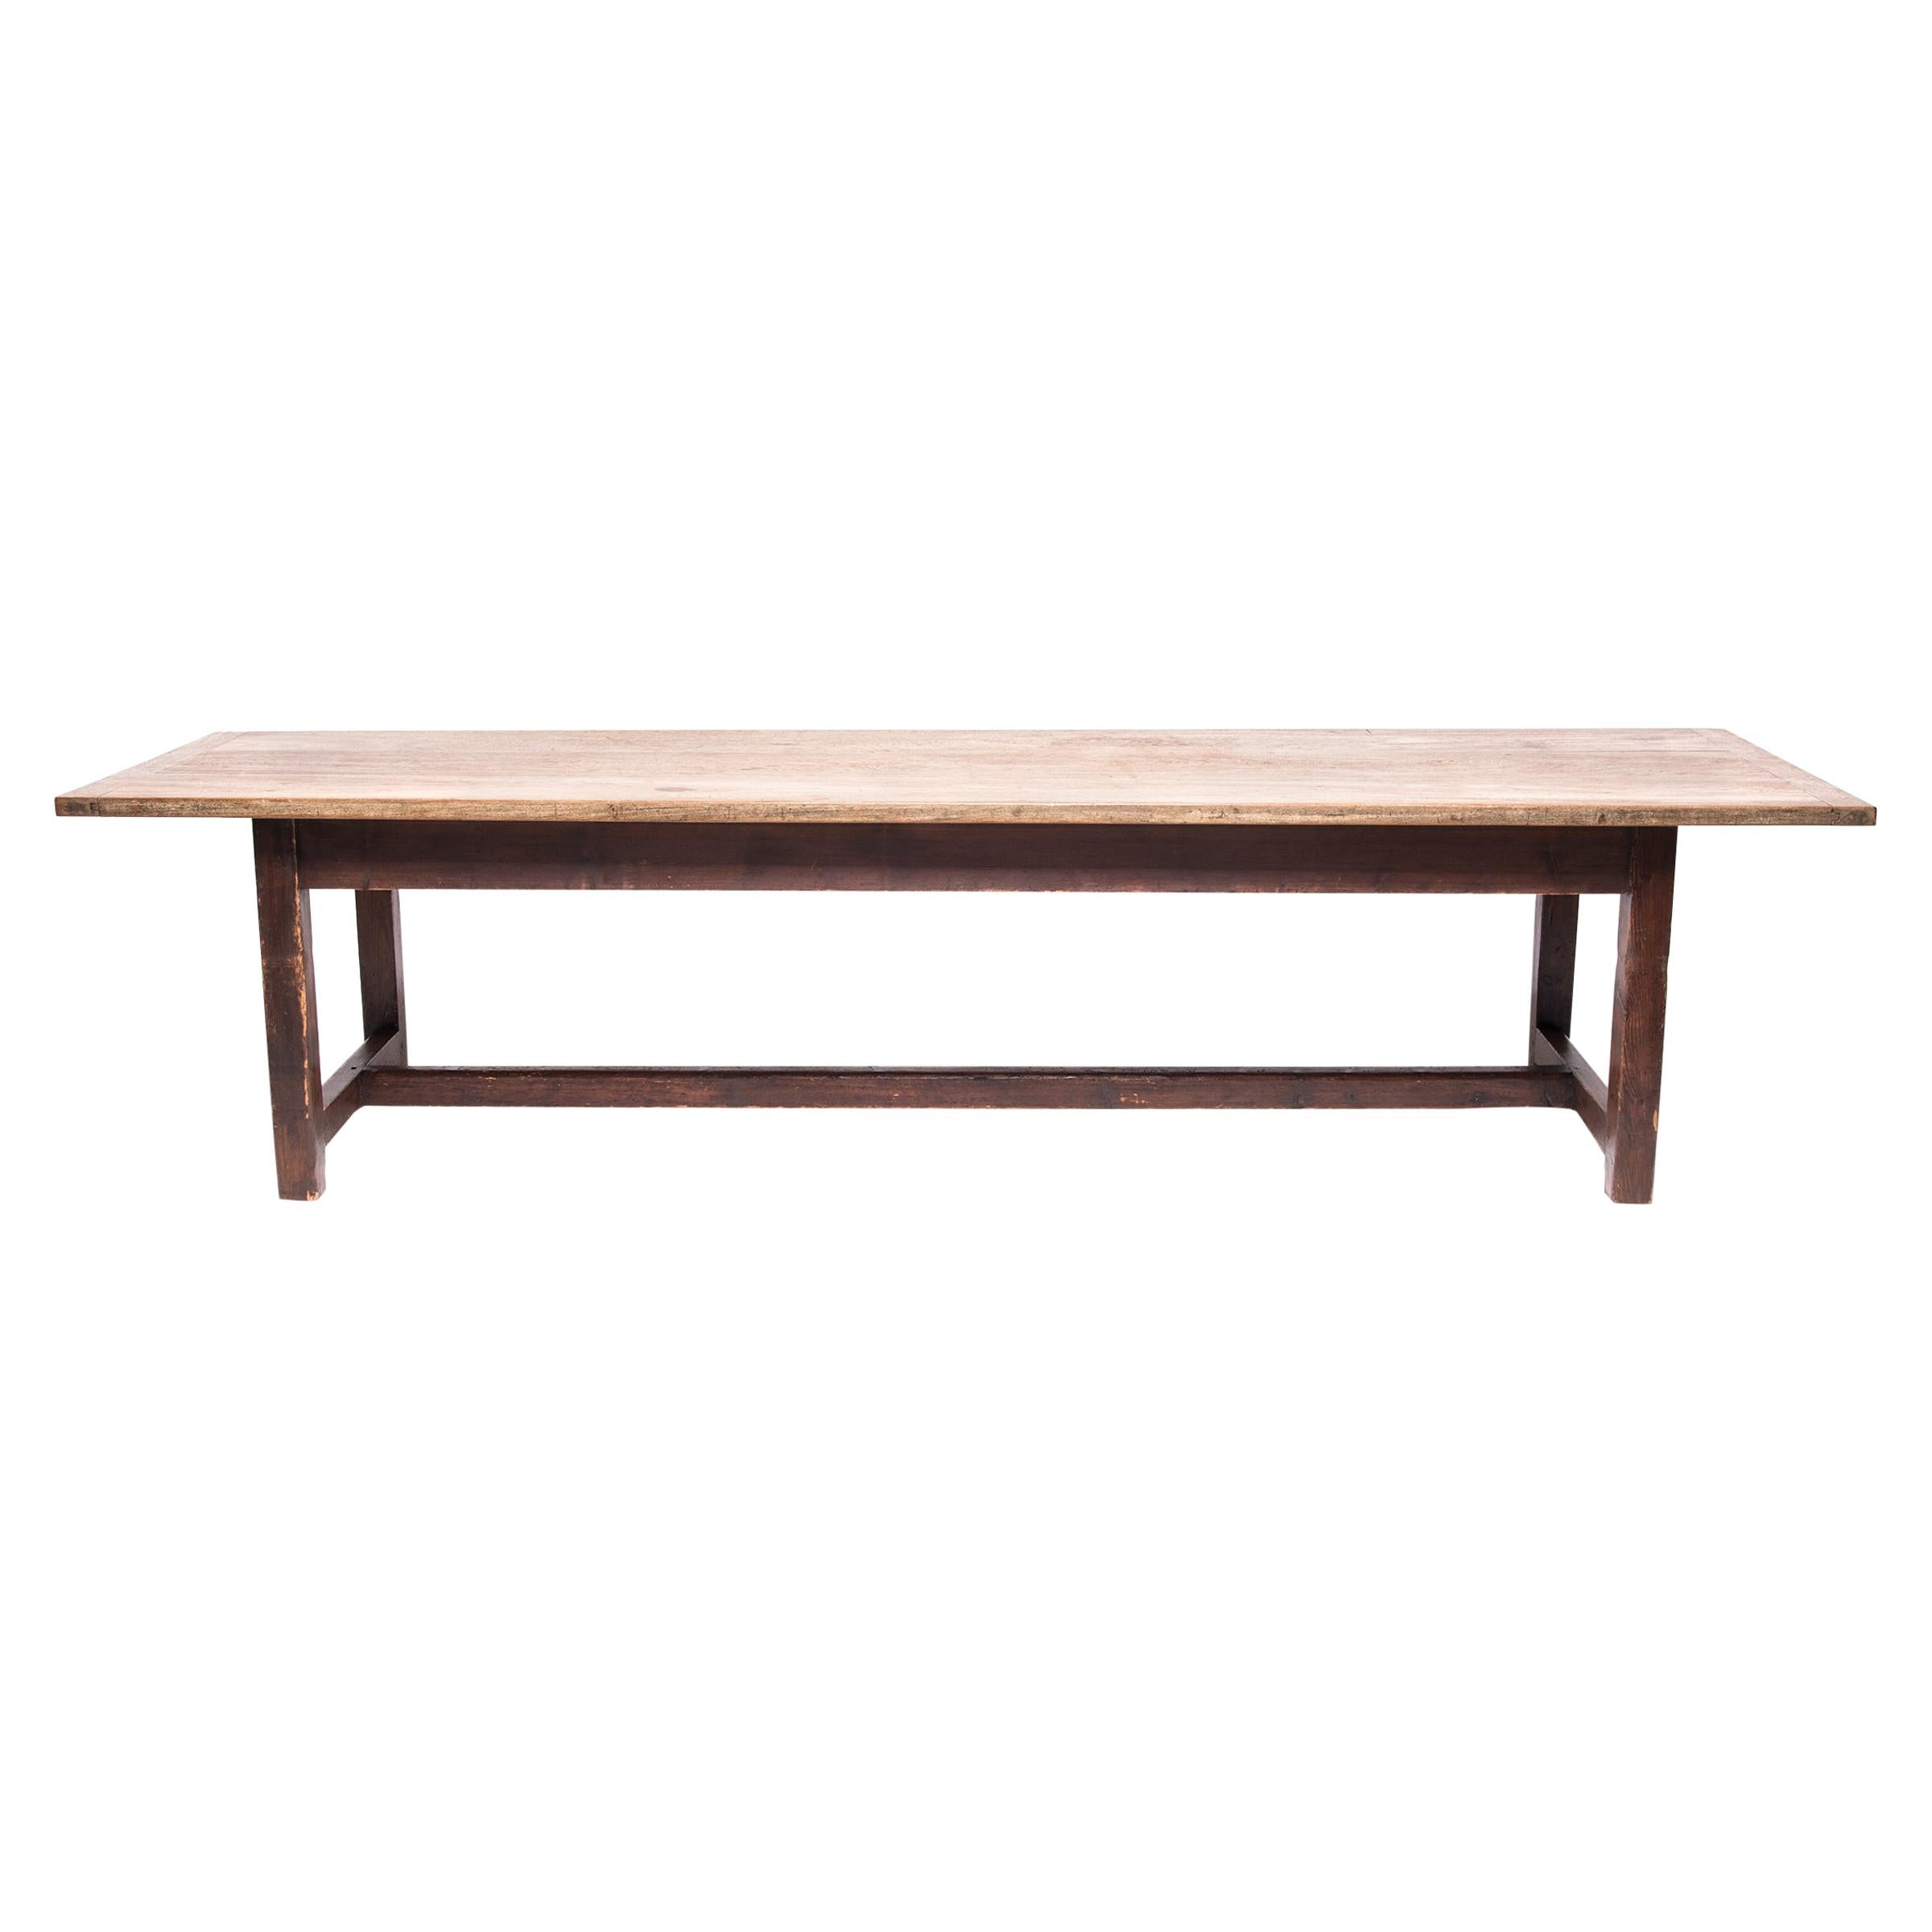 Monumental English Dining Table